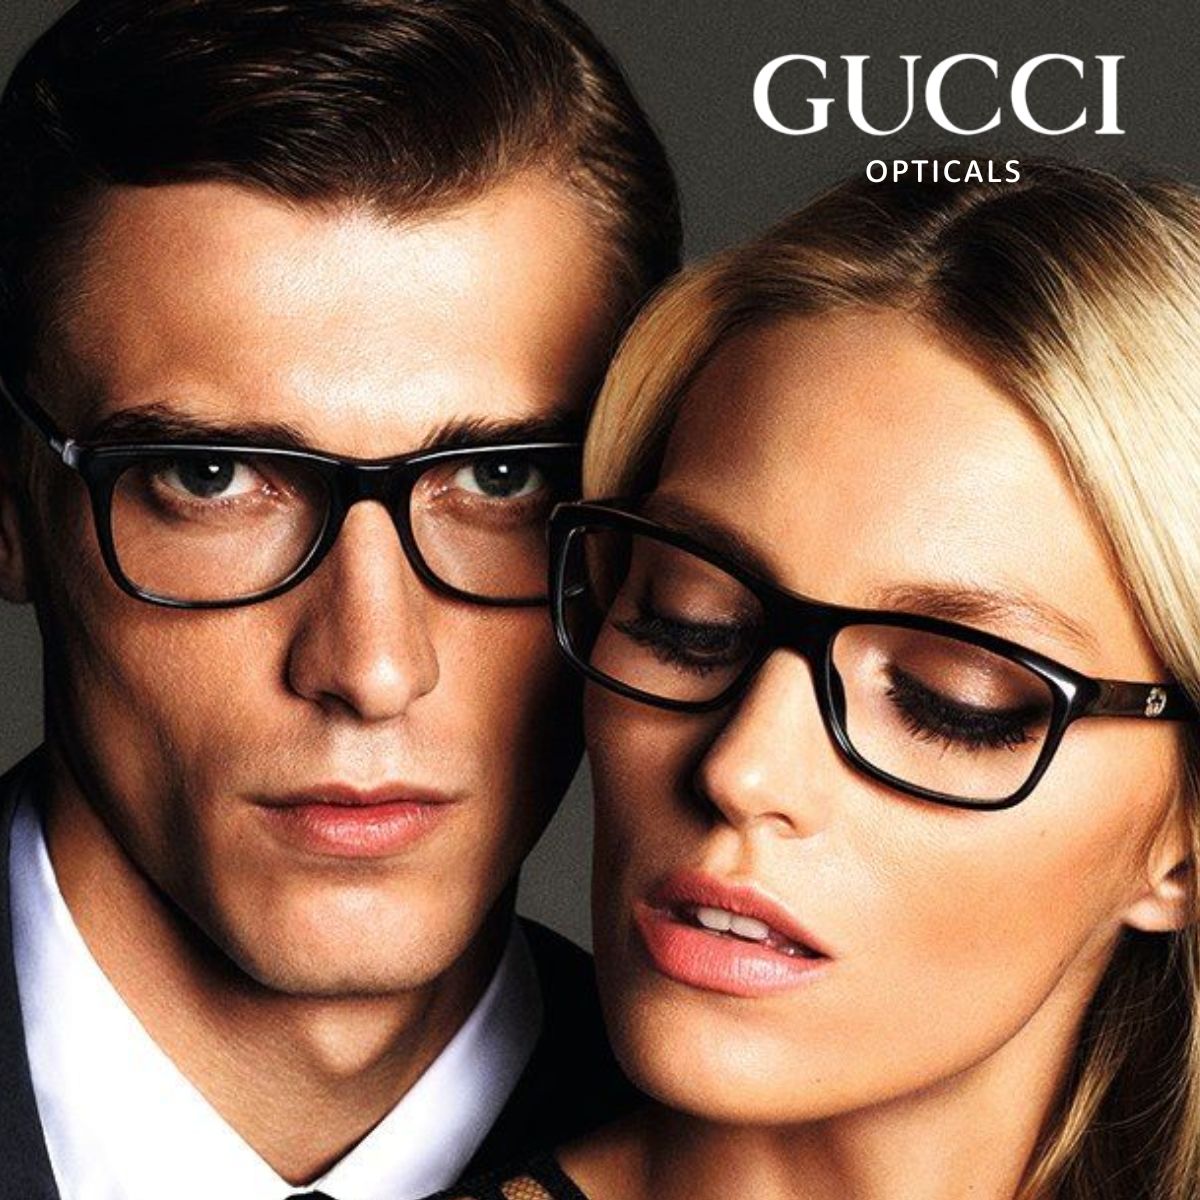 "Explore luxury and style with Optorium's collection of Gucci eyewear, including designer frames for men and women."